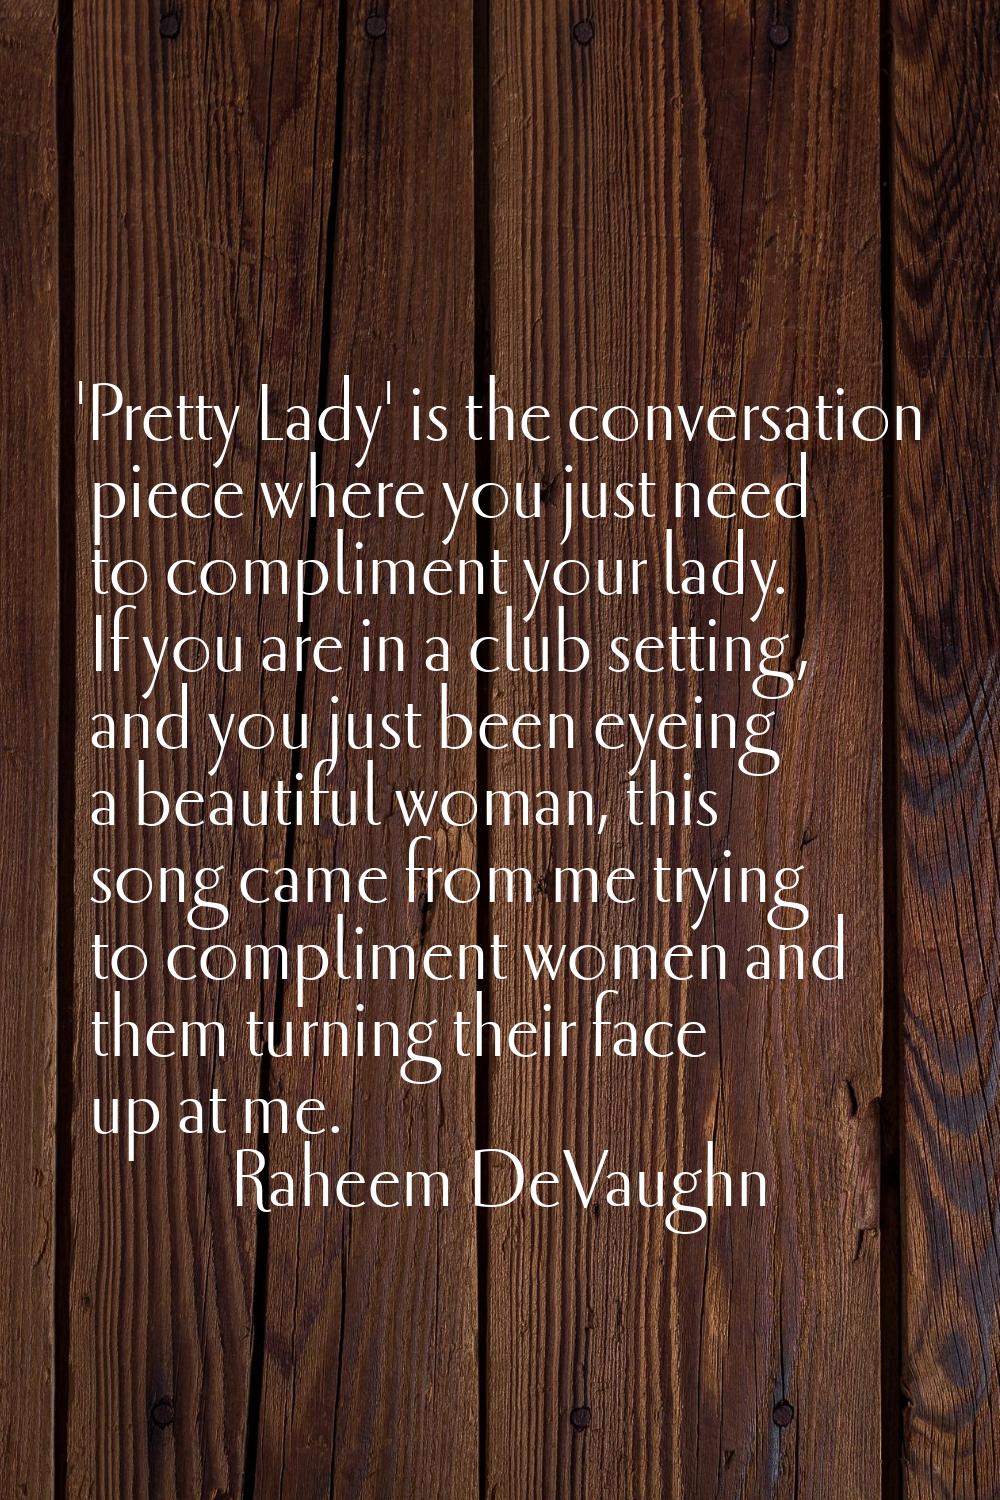 'Pretty Lady' is the conversation piece where you just need to compliment your lady. If you are in 